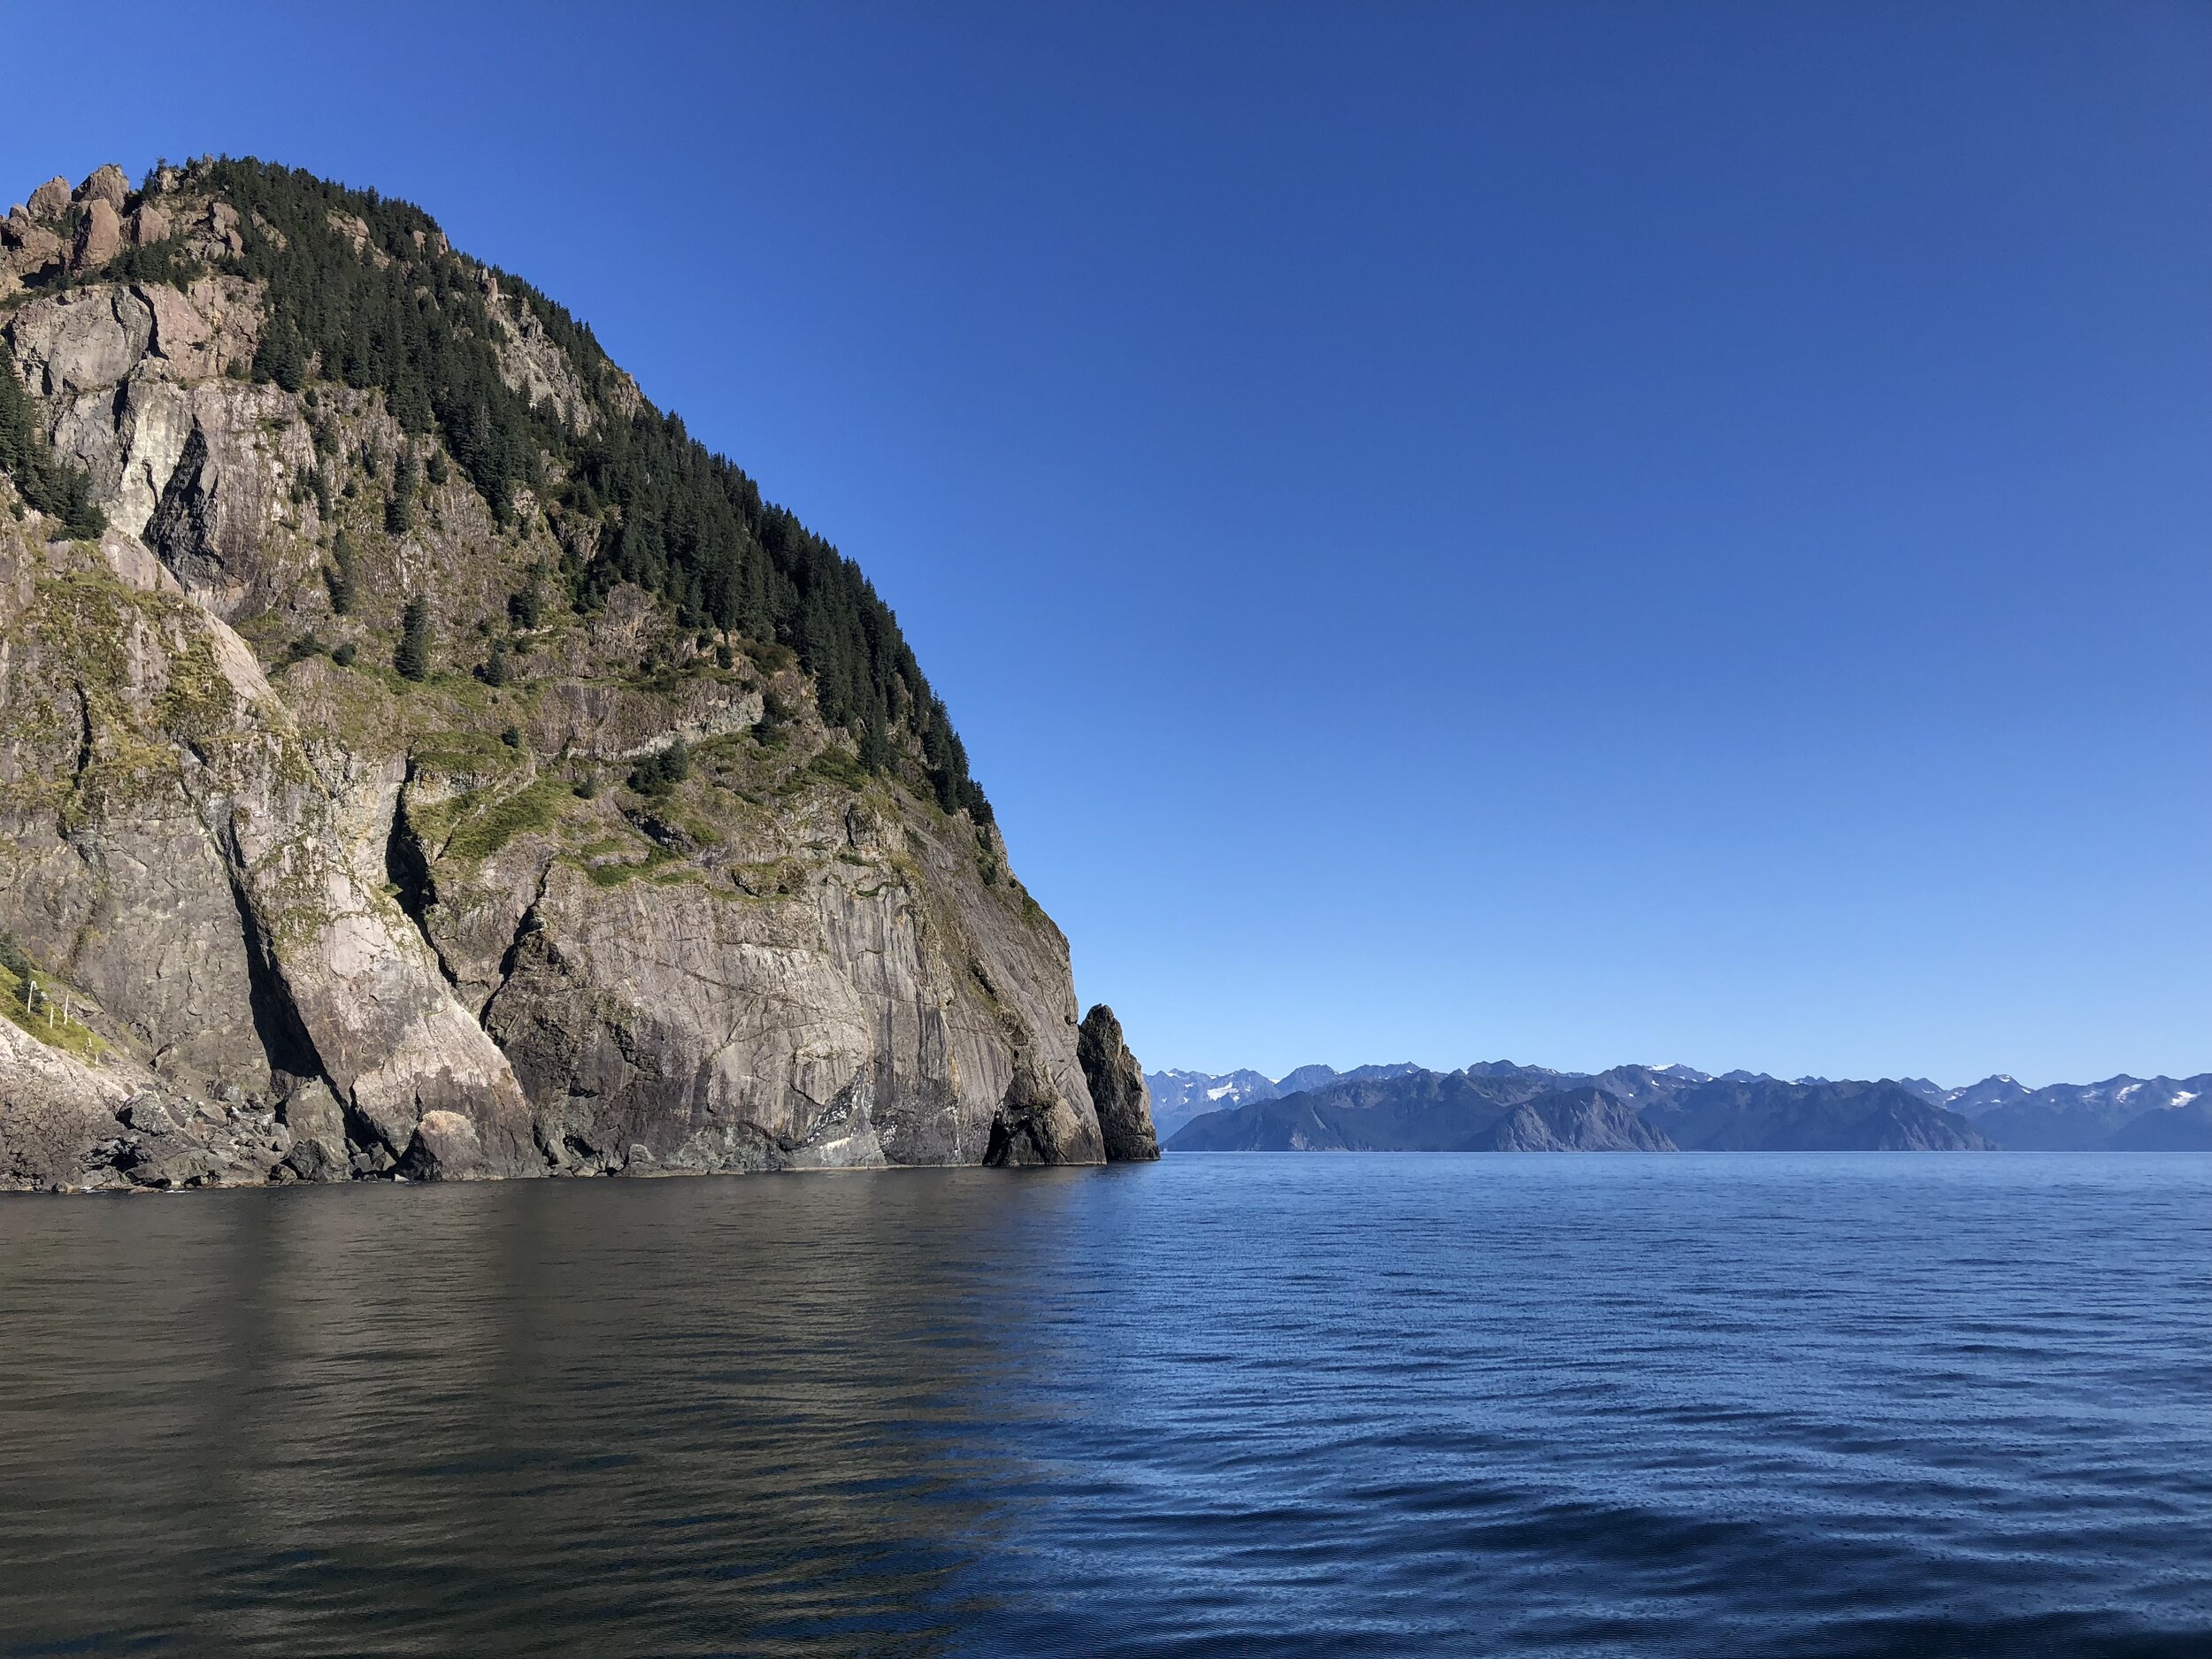  One of my favorite places: Kenai Fjords National Park in Alaska 